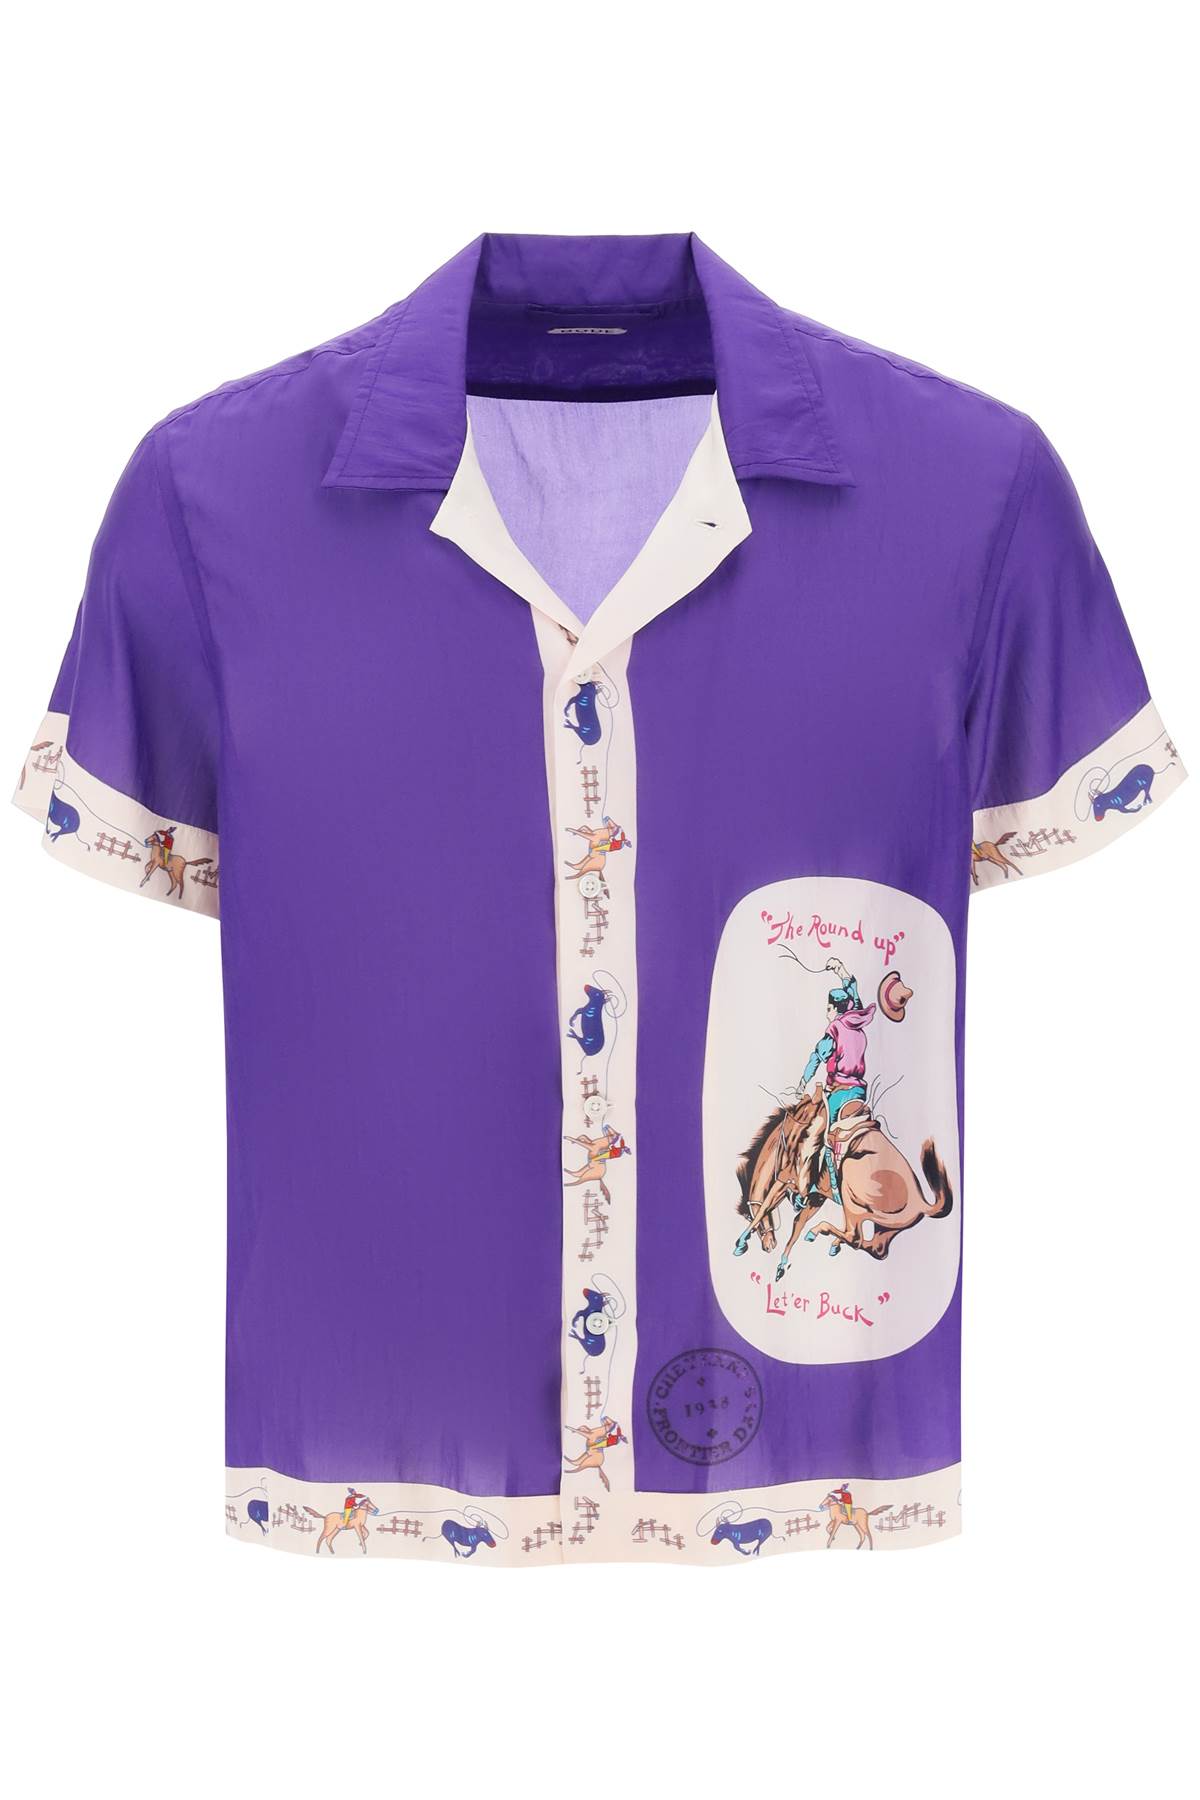 BODE ROUND UP BOWLING SHIRT WITH GRAPHIC MOTIF